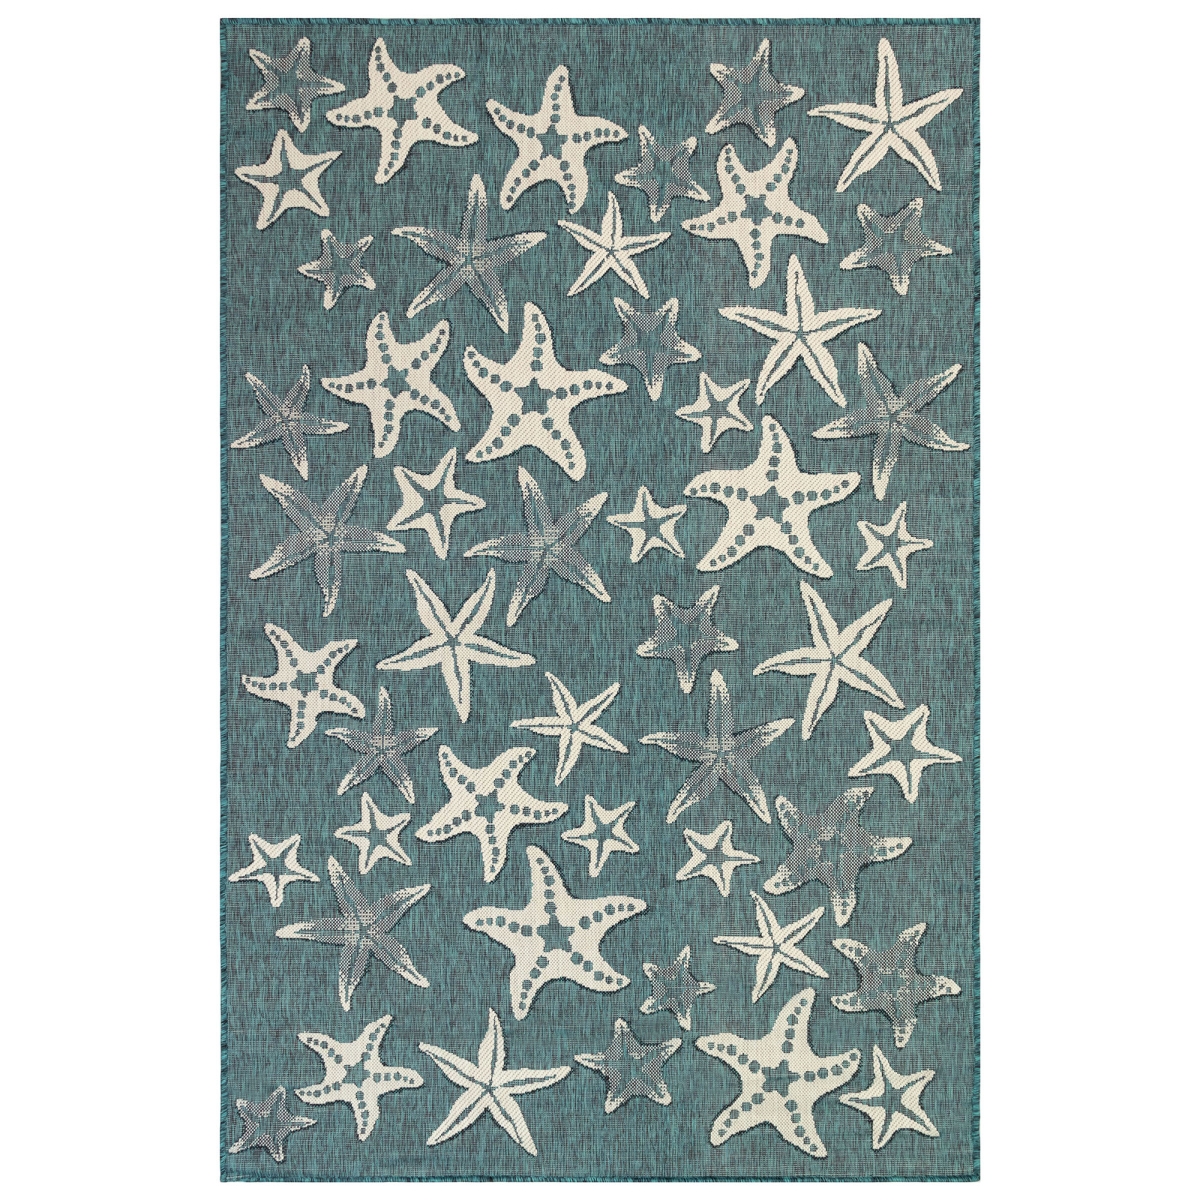 Cre80841594 Liora Manne Carmel Starfish Indoor & Outdoor Rug, Teal - 7 Ft. 10 In. X 9 Ft. 10 In.